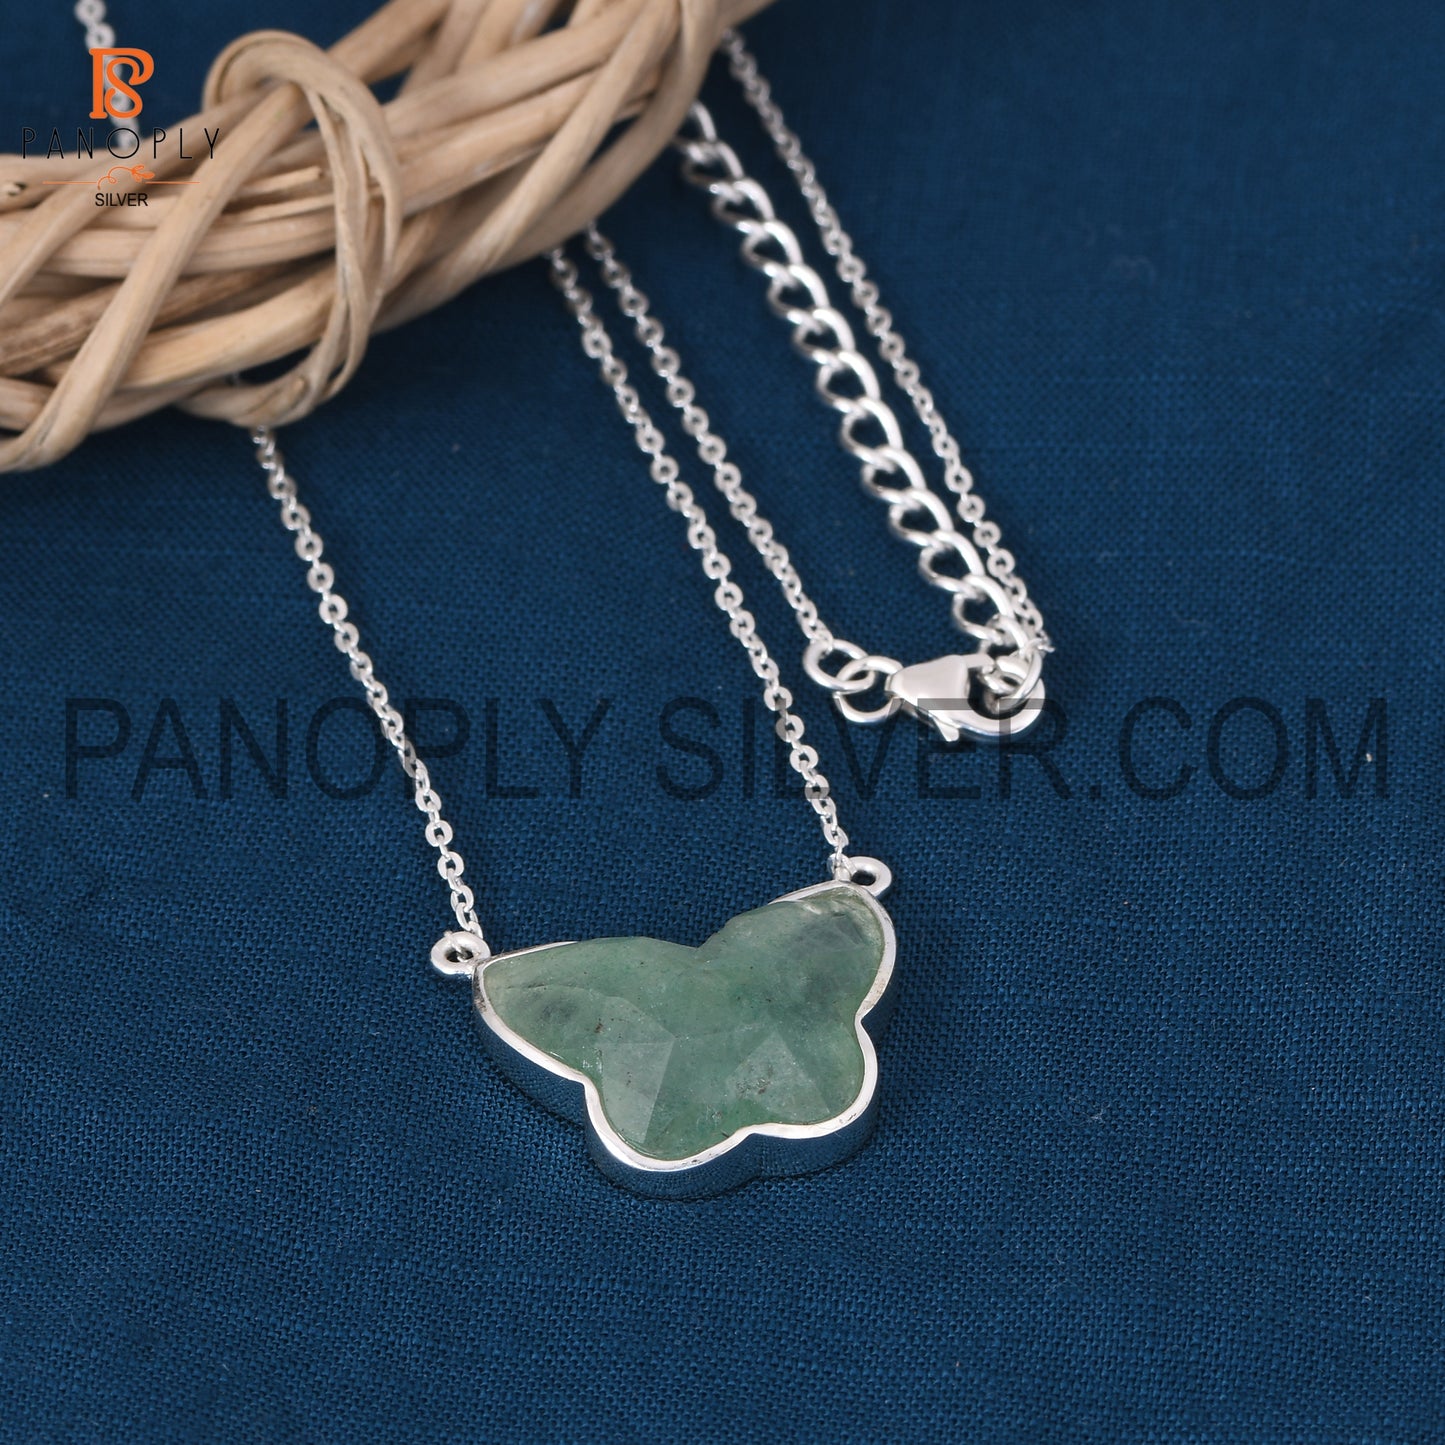 Butterfly 925 Silver Chain Adjustable Pendant